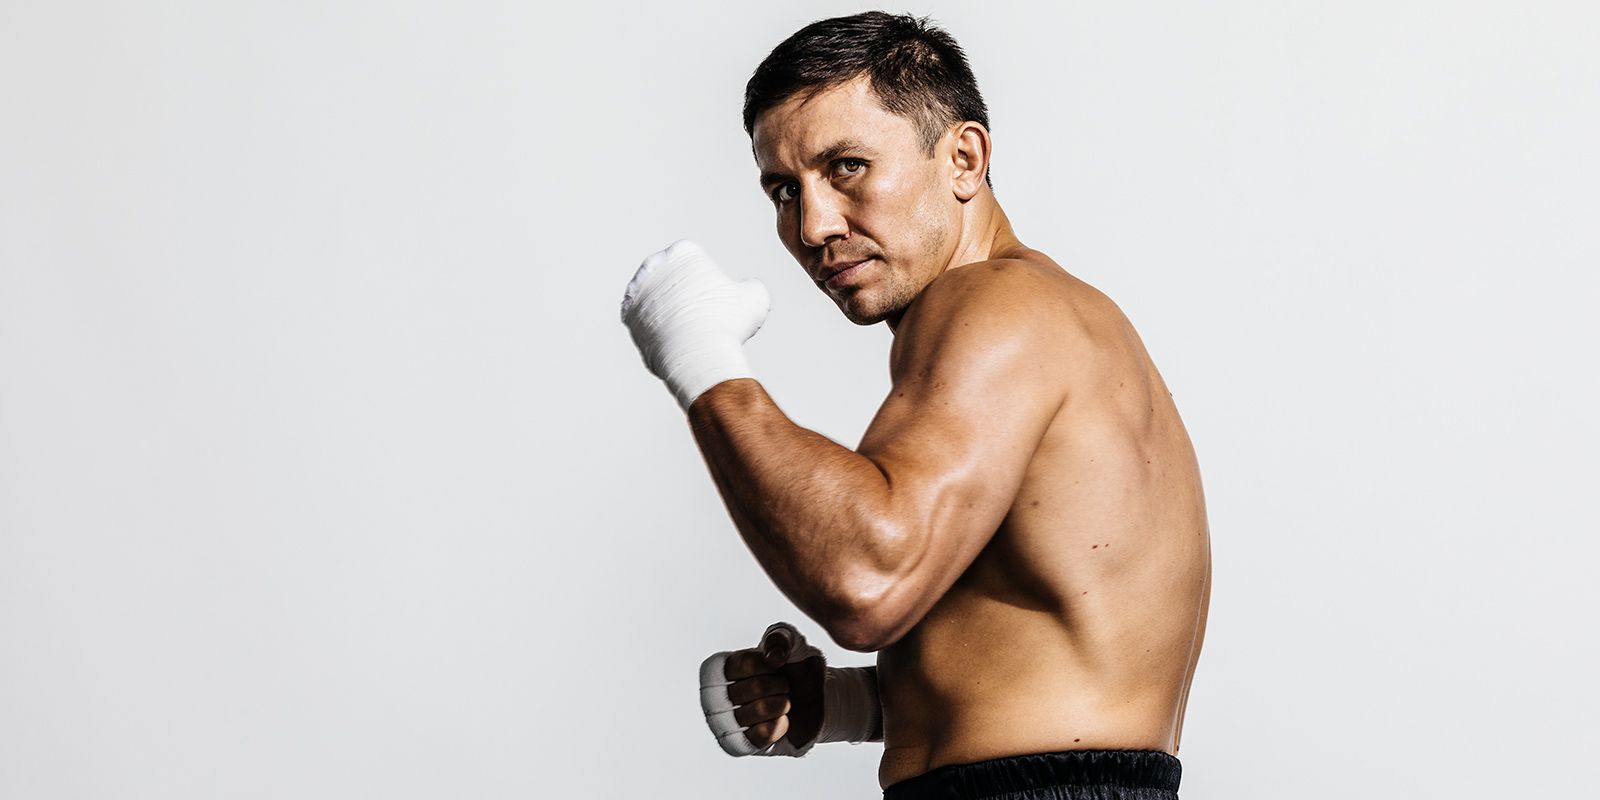 Gennady Golovkin has waited years for career-defining fight with Canelo Alvarez